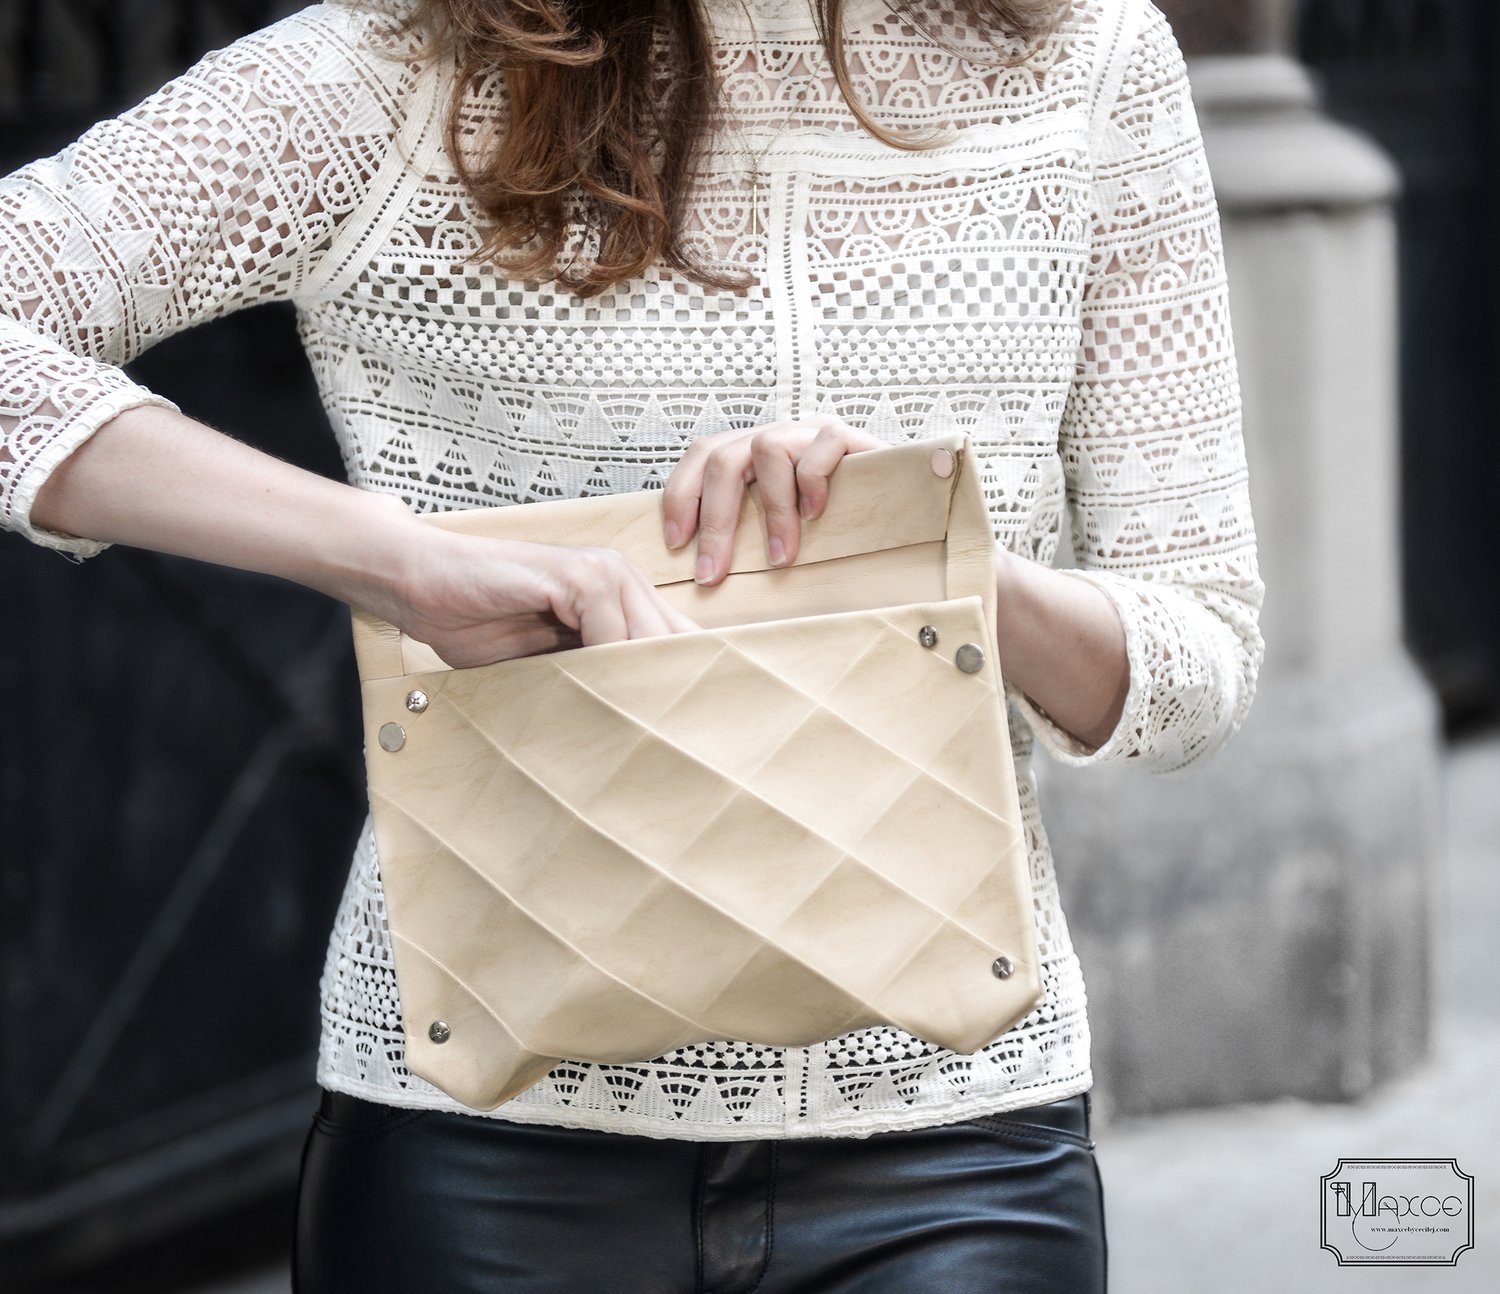 Image of CLUTCH IN ECO LEATHER BEIGE - SIZE M